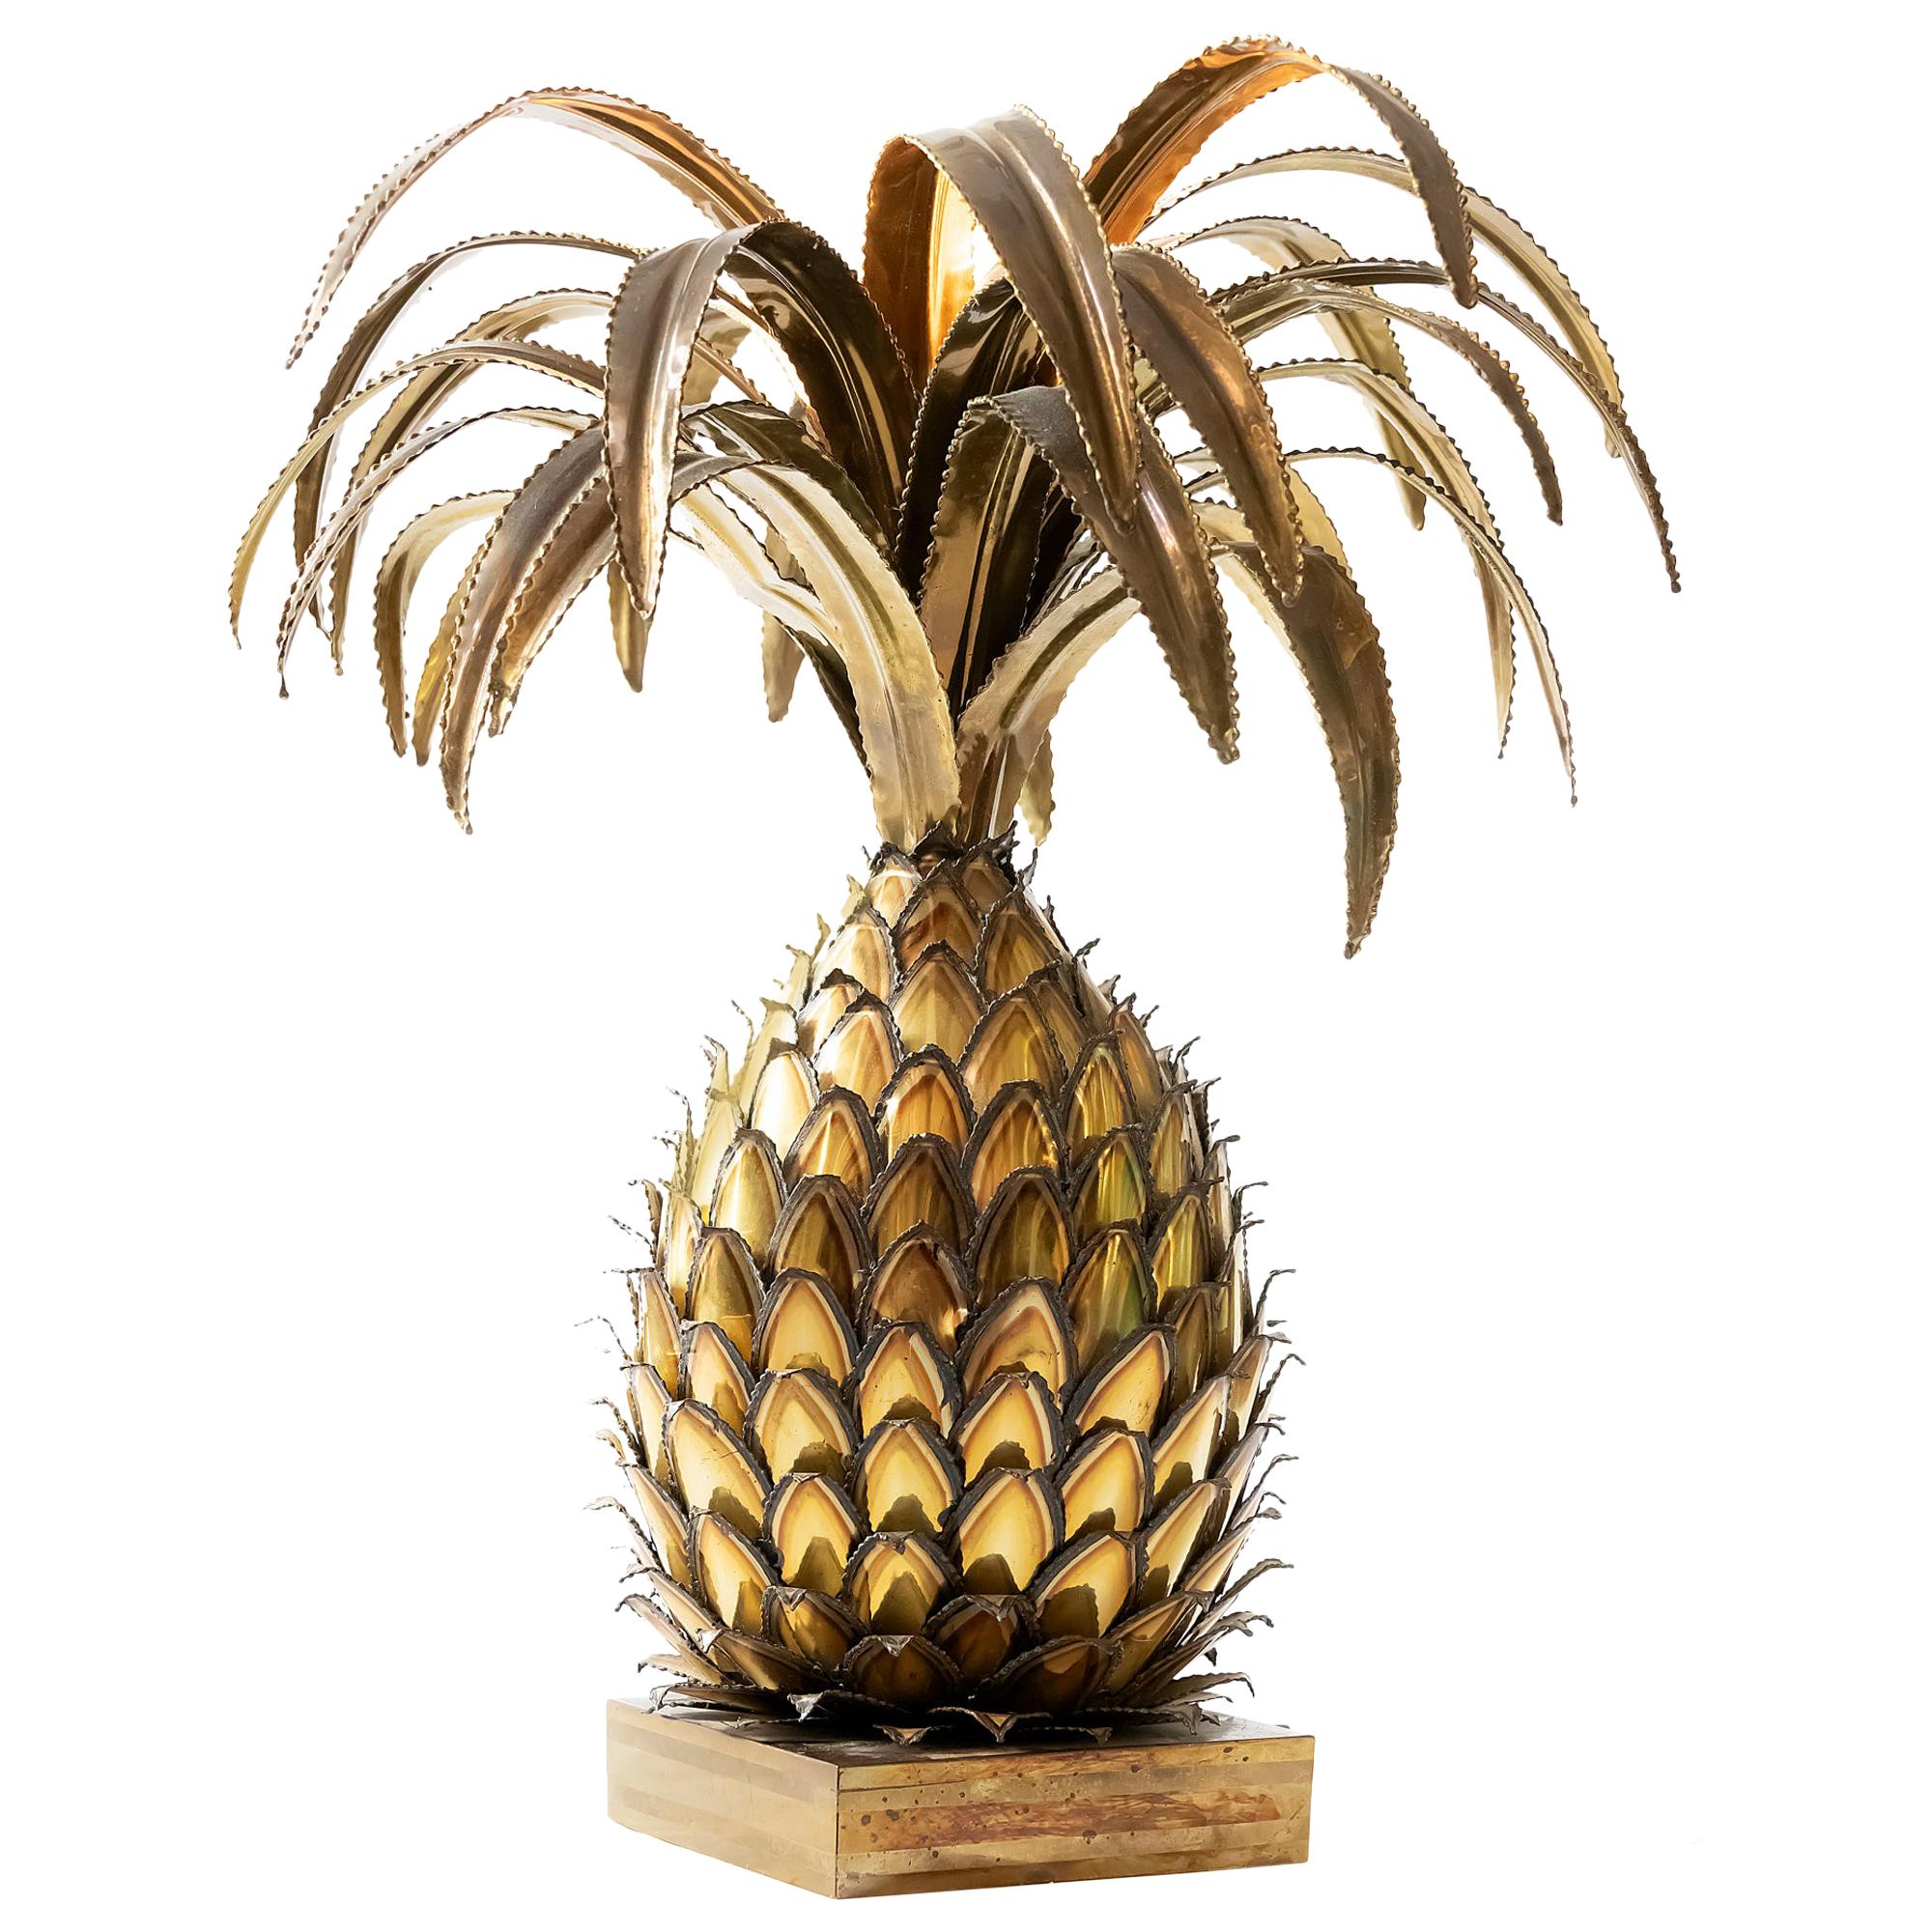 Vintage French Pineapple/Ananas Table Lamp by Maison Jansen